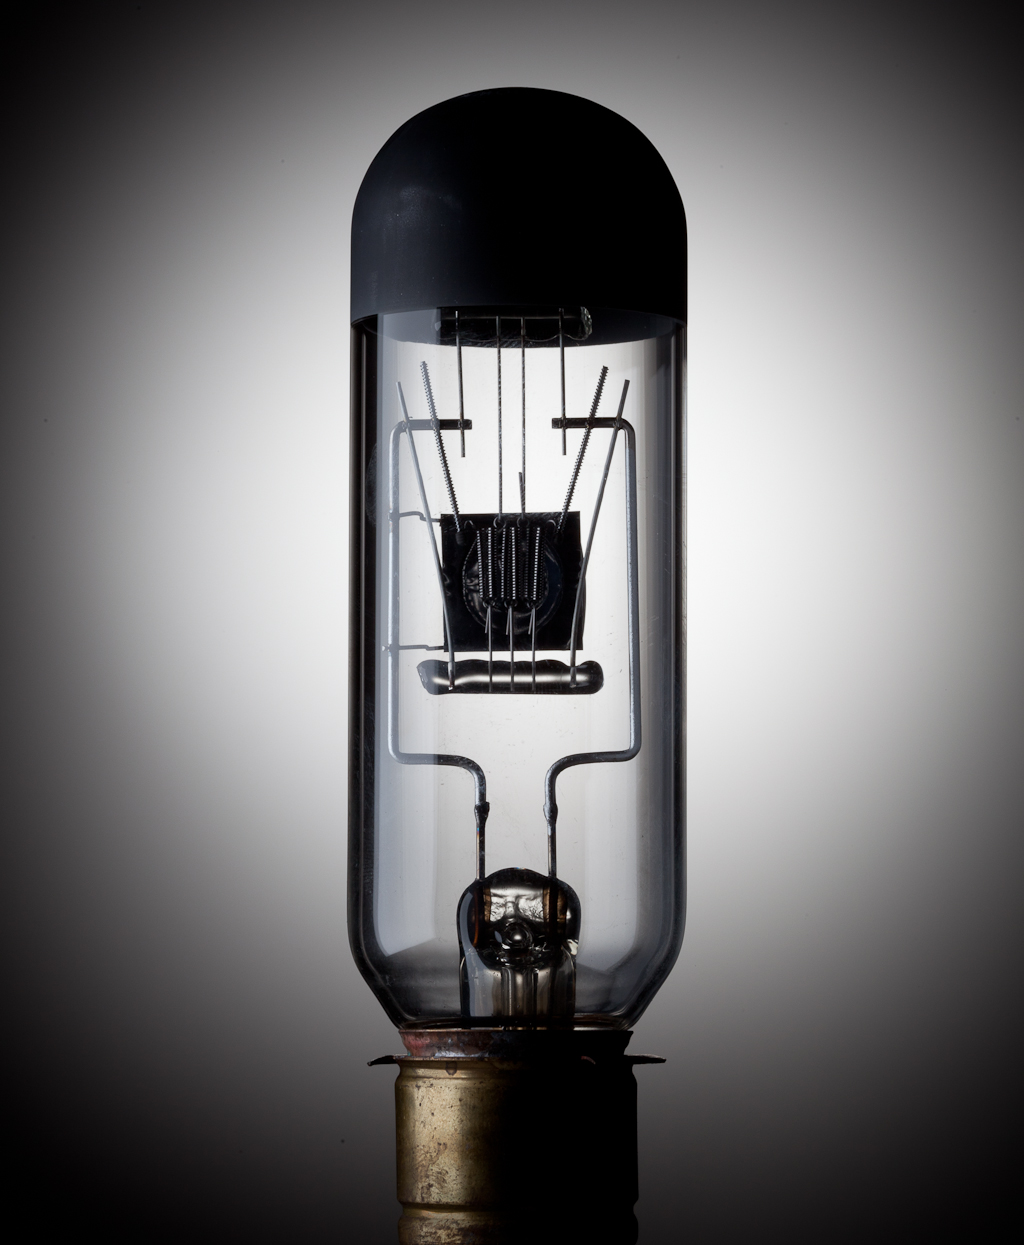 from the studio ~ the mystique of old lightbulbs